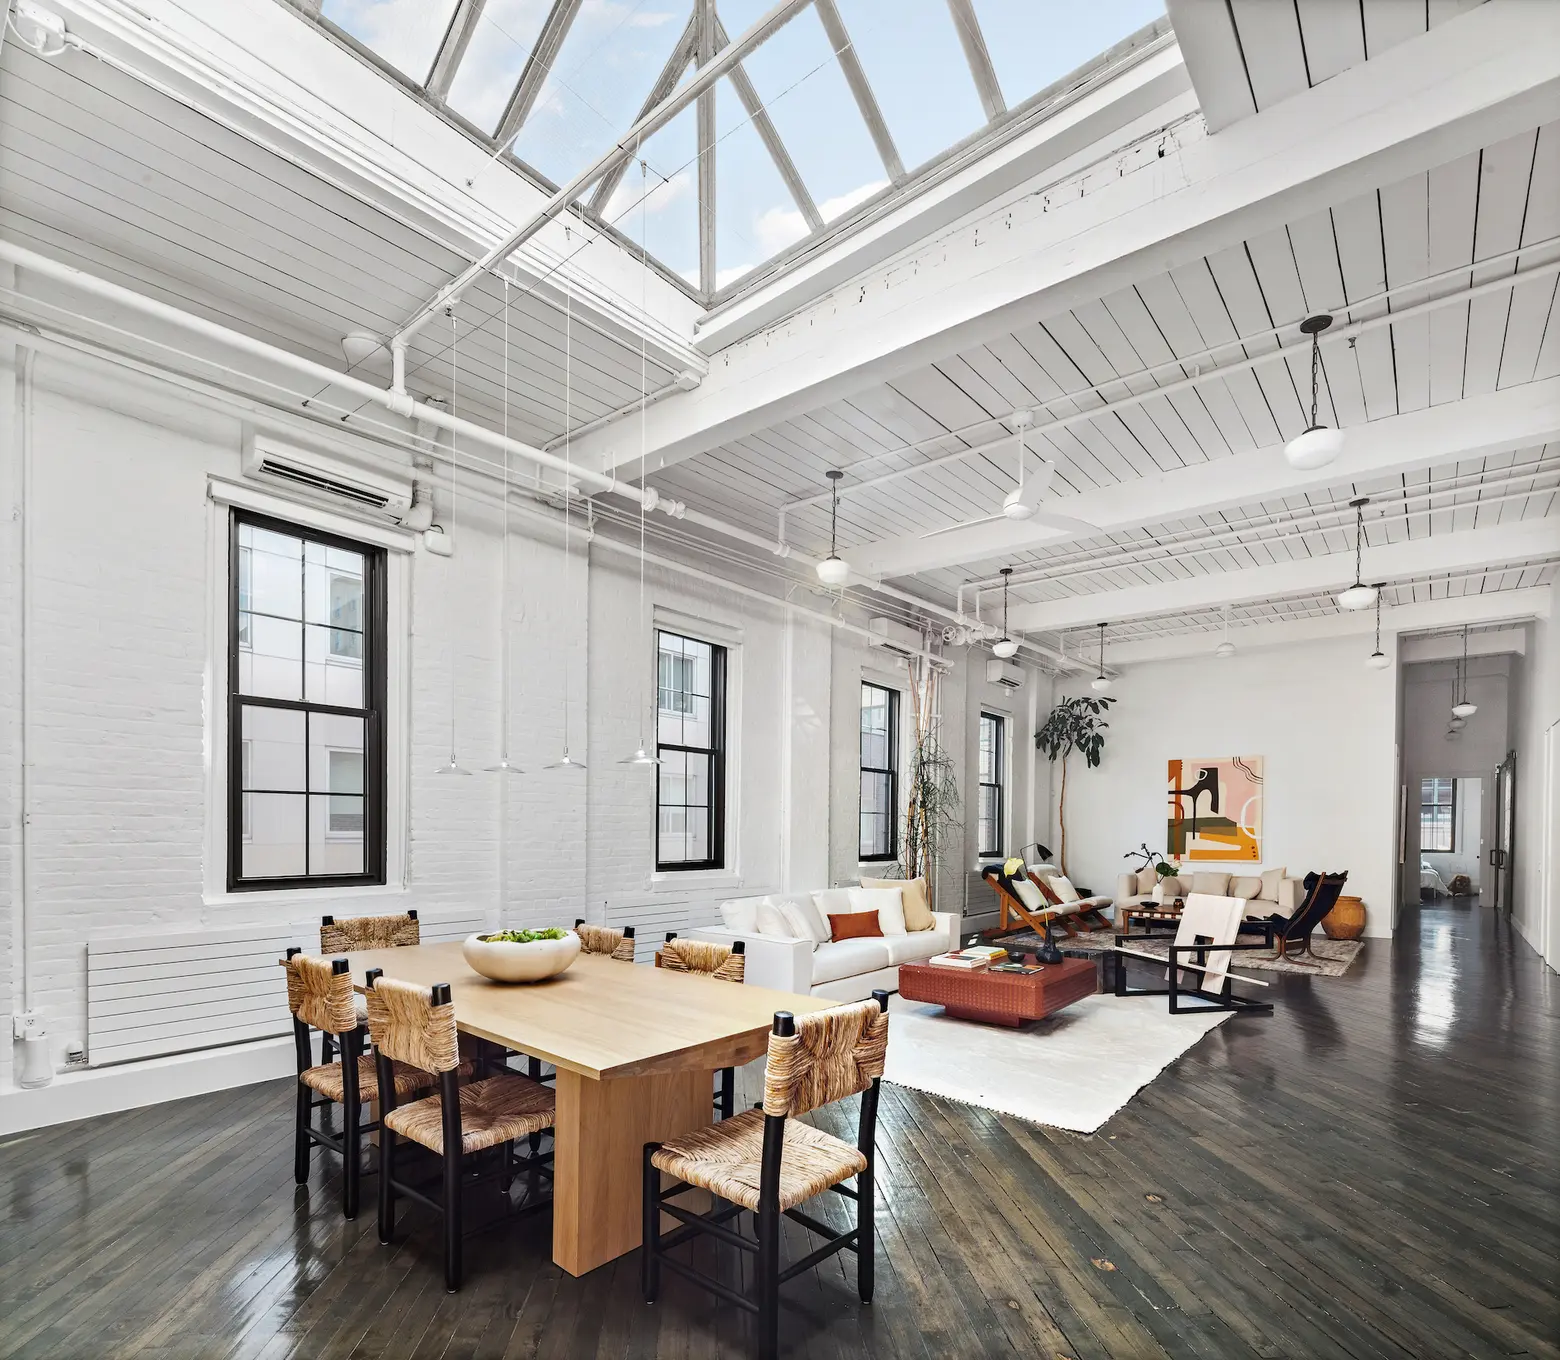 Skylit loft on Dumbo’s famous Instagram intersection lists for $5M